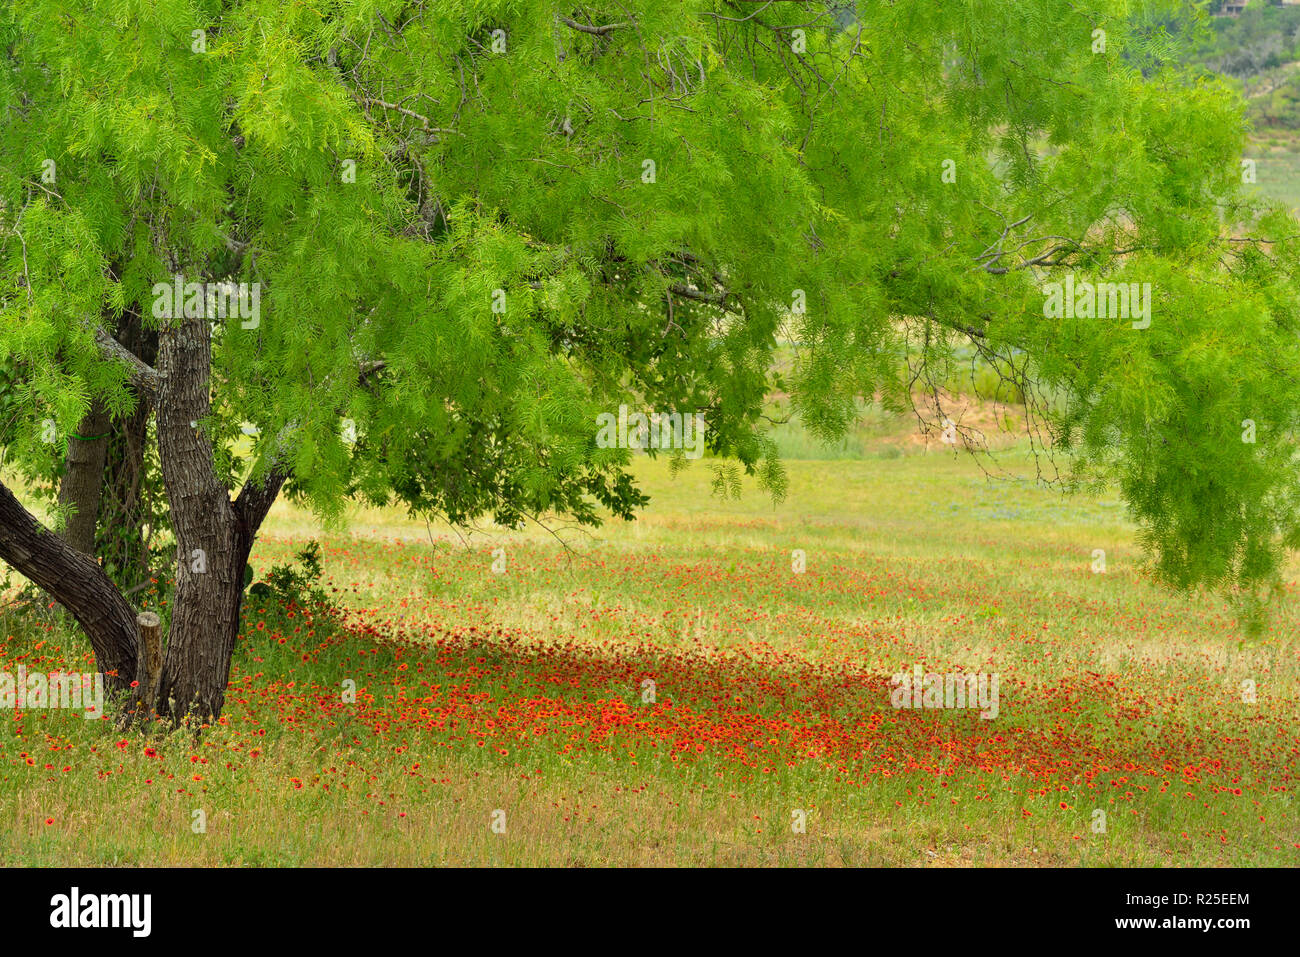 Indian blanket/firewheel flowers and mesquite tree, Turkey Bend LCRA, Texas, USA Stock Photo